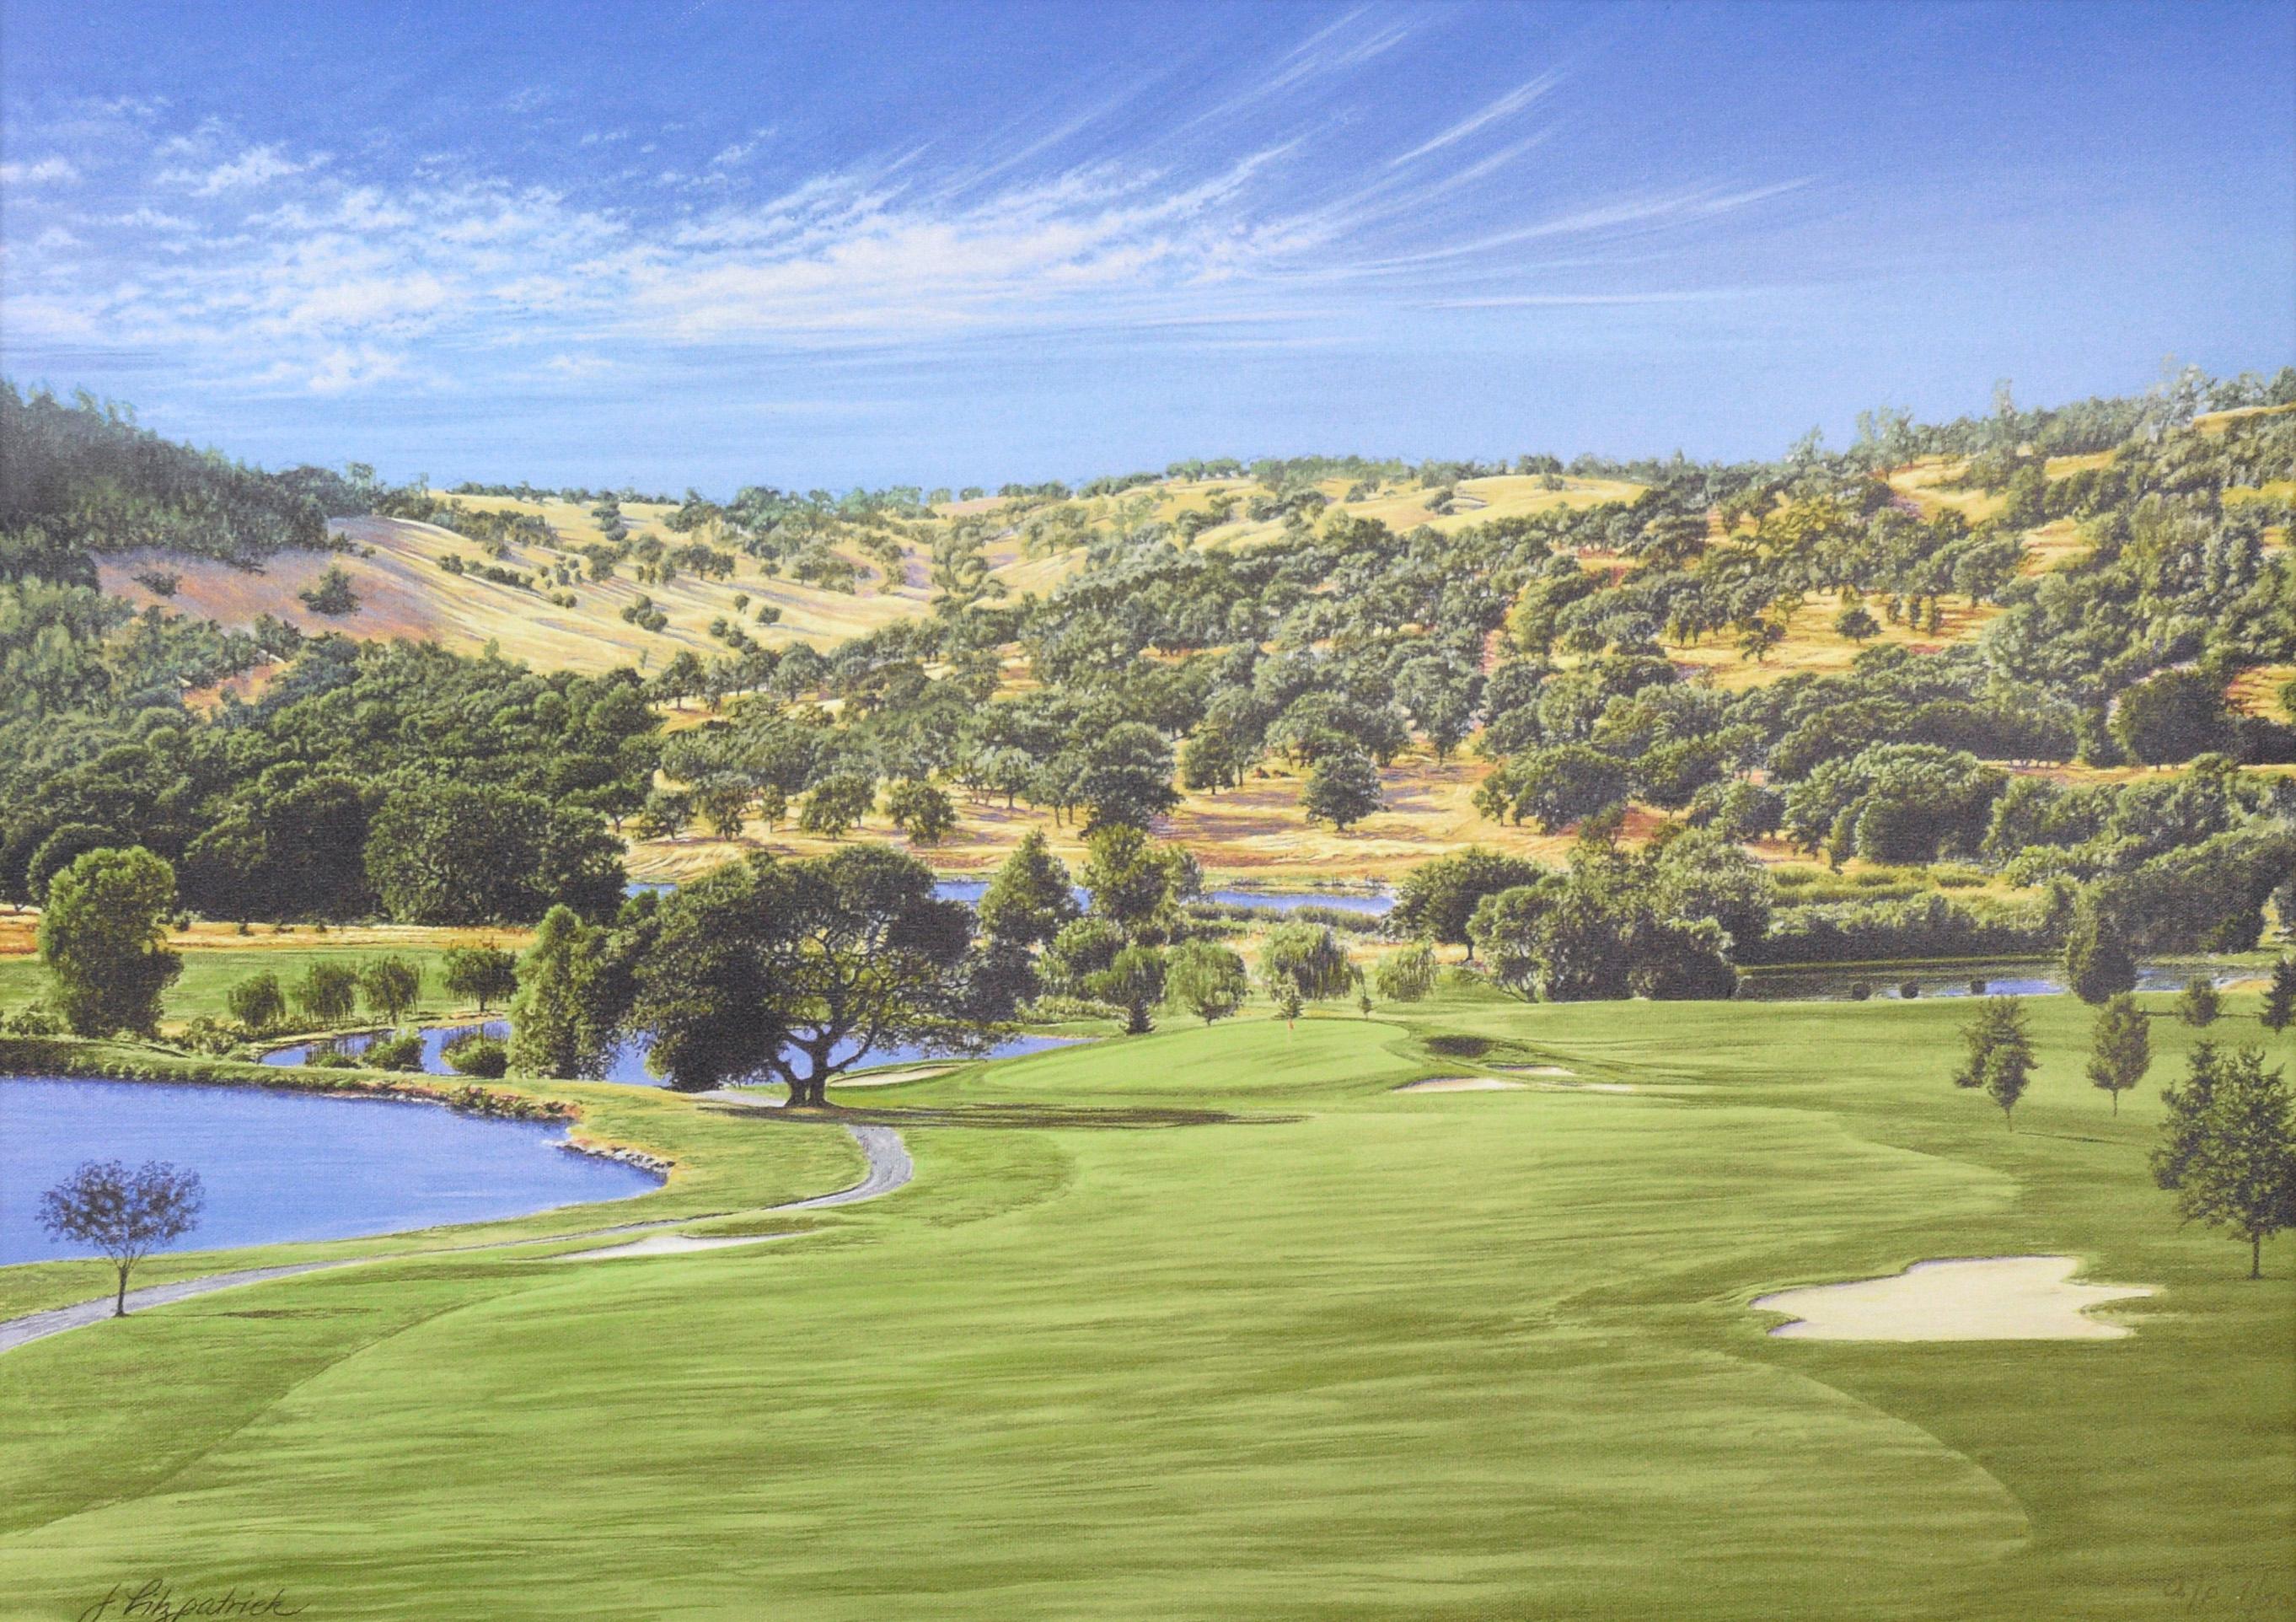 The Tenth Hole at Auburn Valley Golf Course - AP, 1/50 - Giclee on Canvas - Print by Jim Fitzpatrick